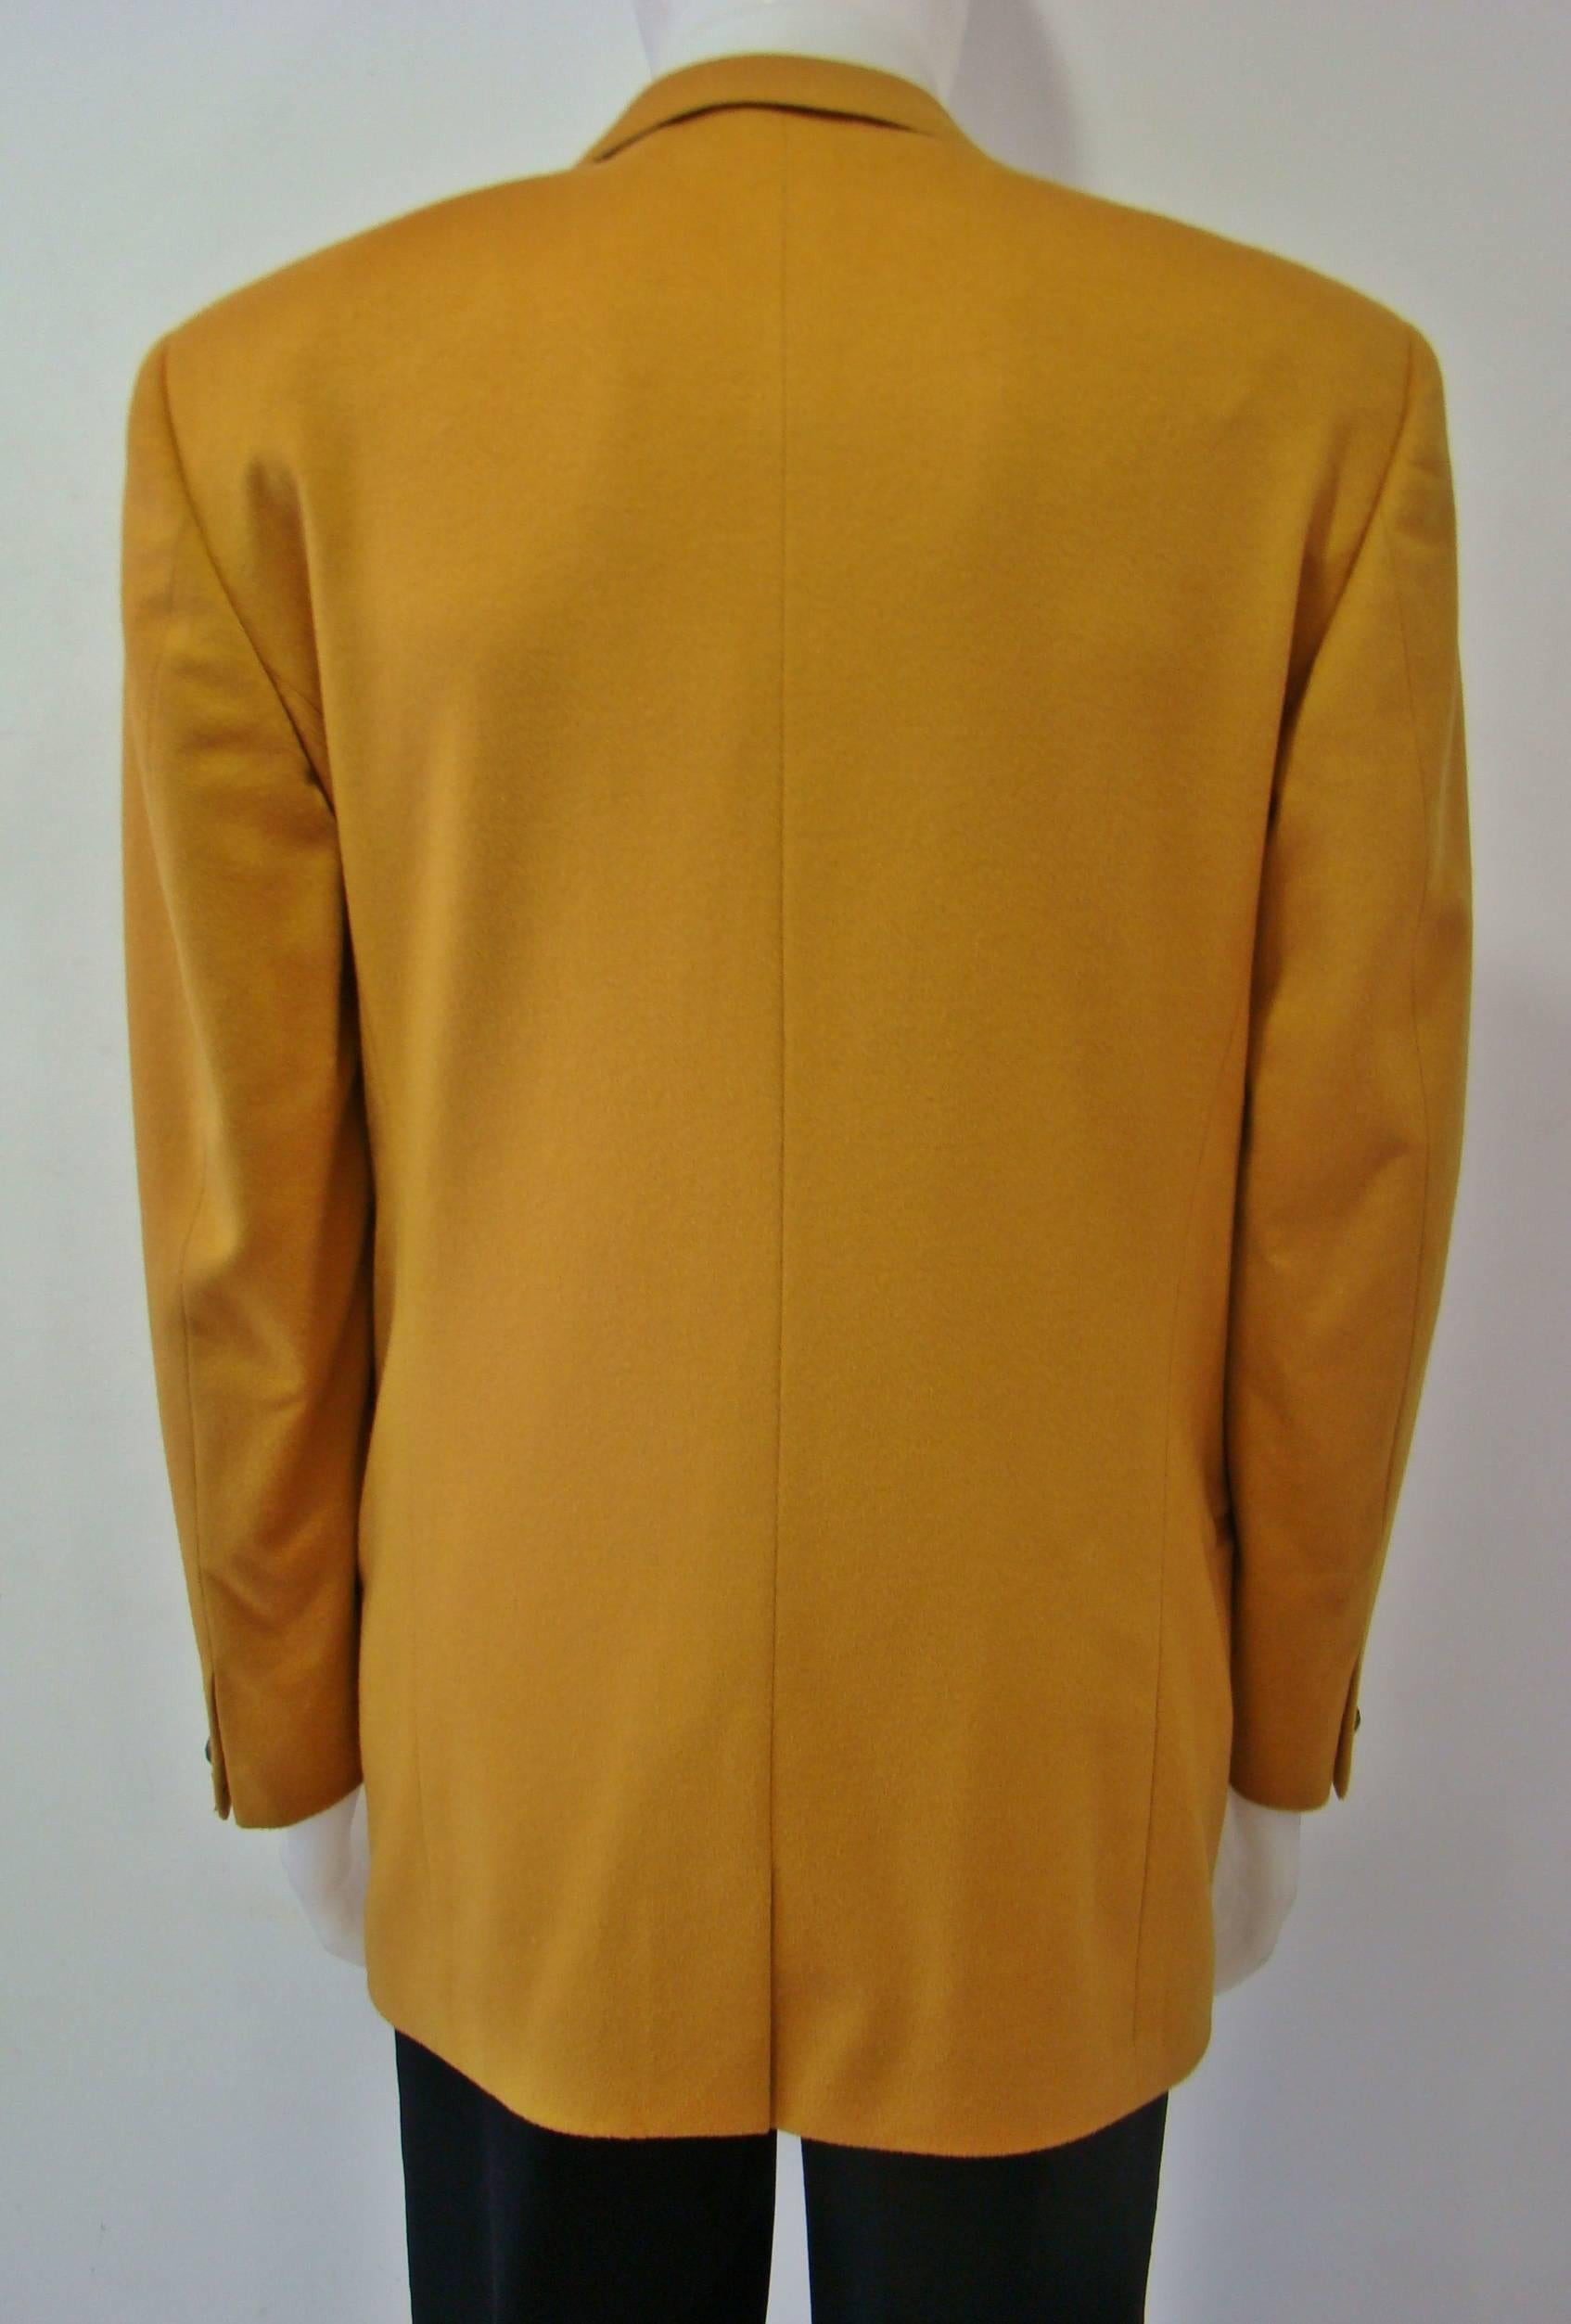 Rare Gianni Versace Mustard Wool Jacket For Sale 1